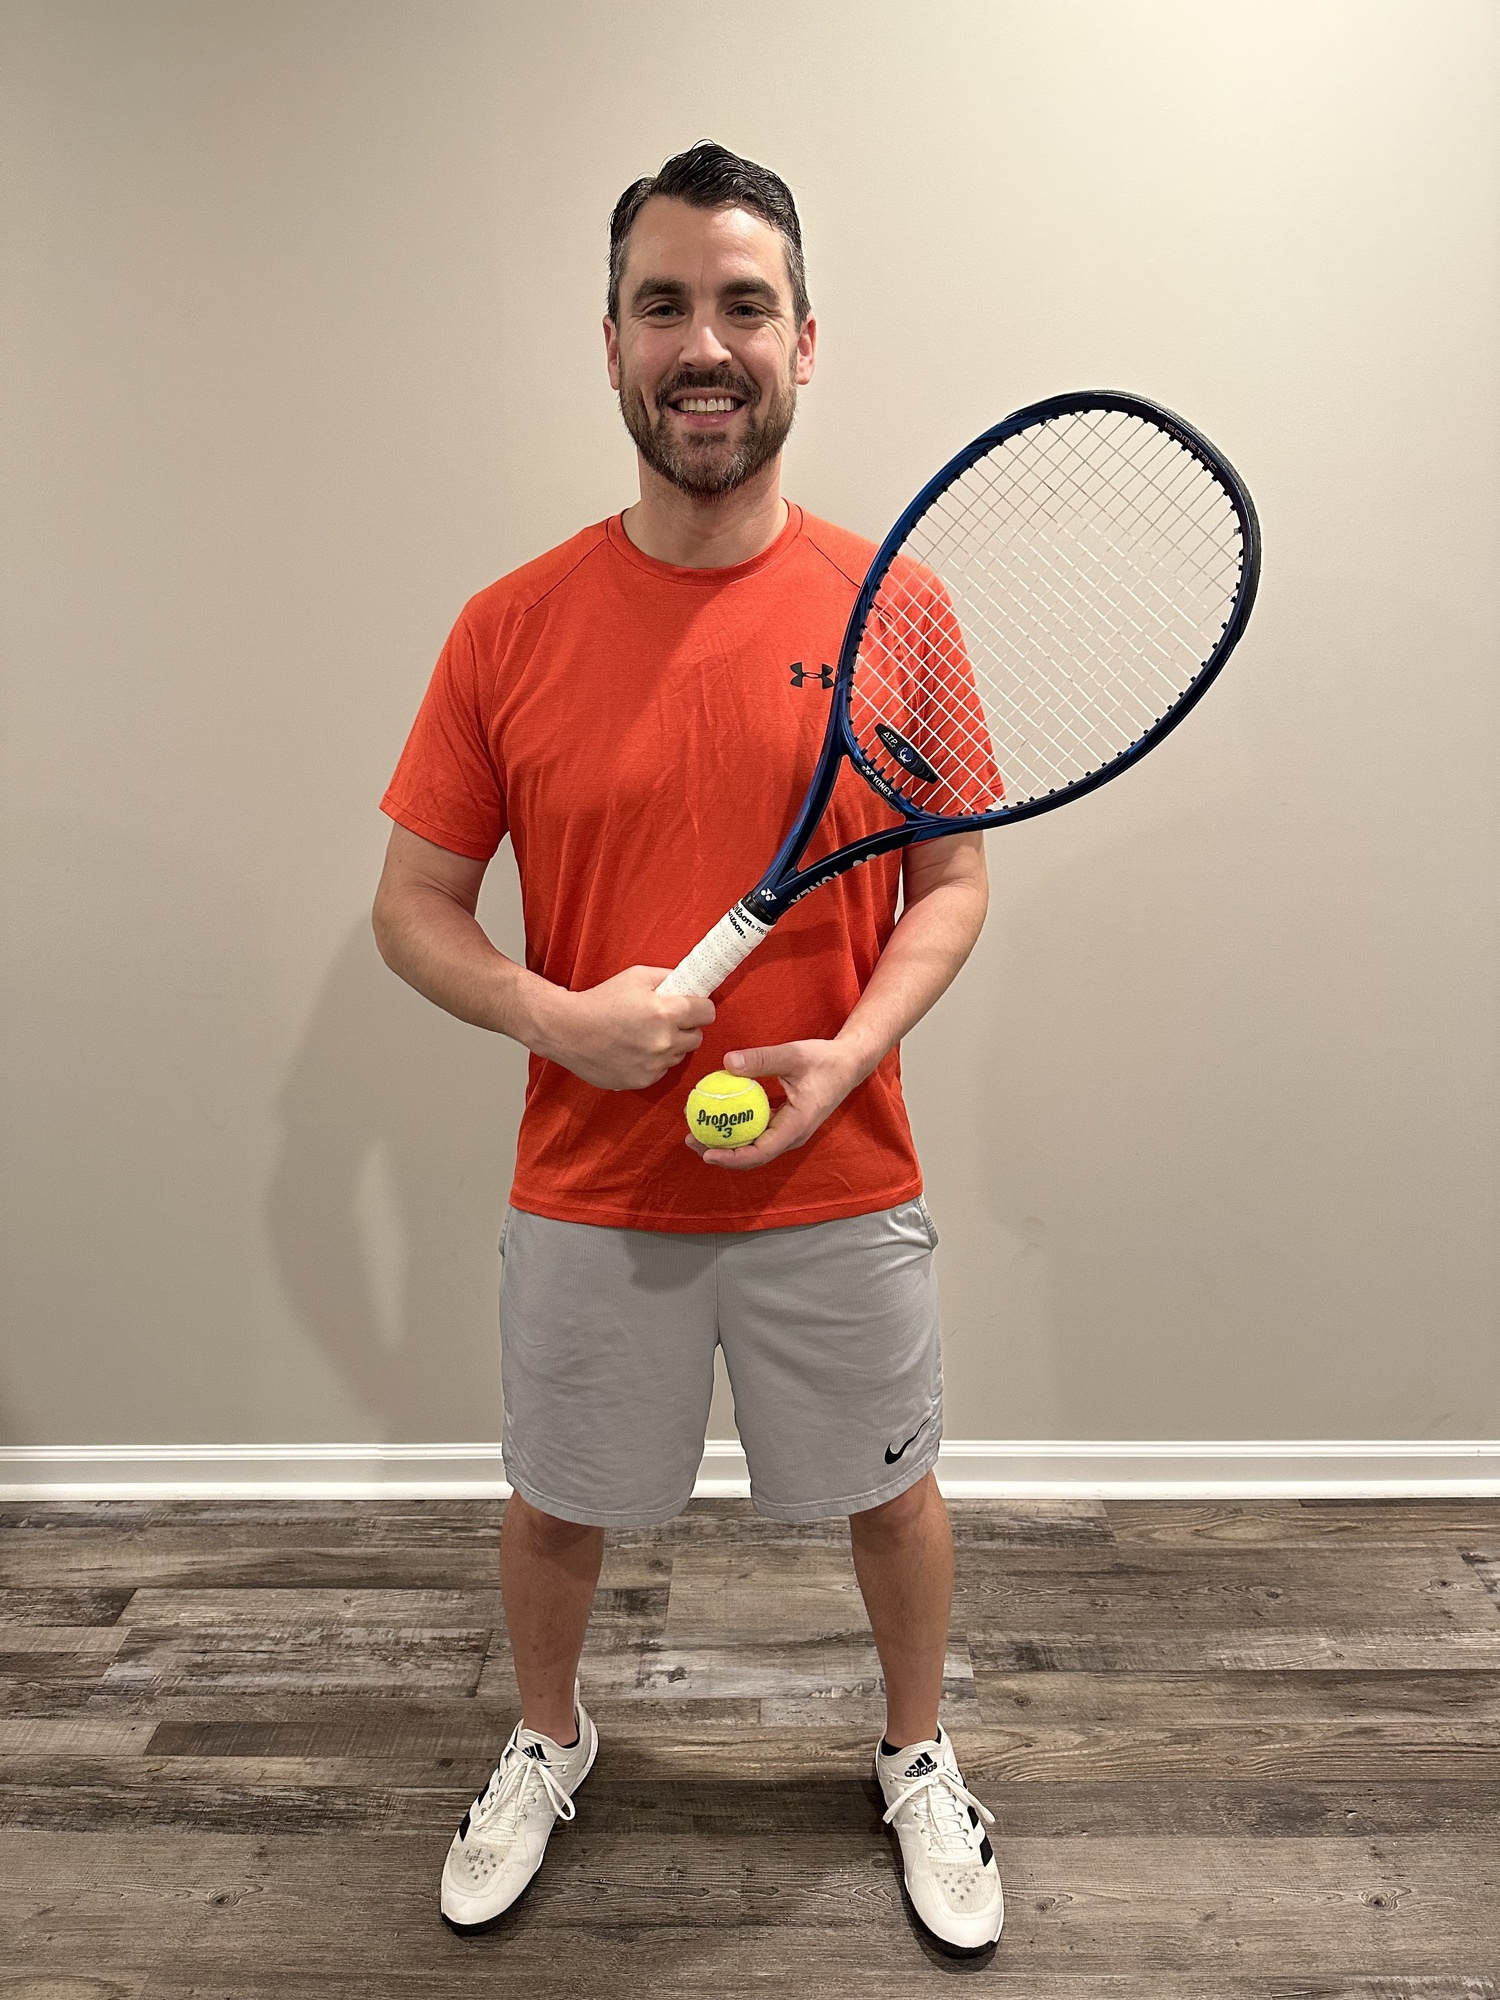 Matthew H. teaches tennis lessons in Rocky River, OH